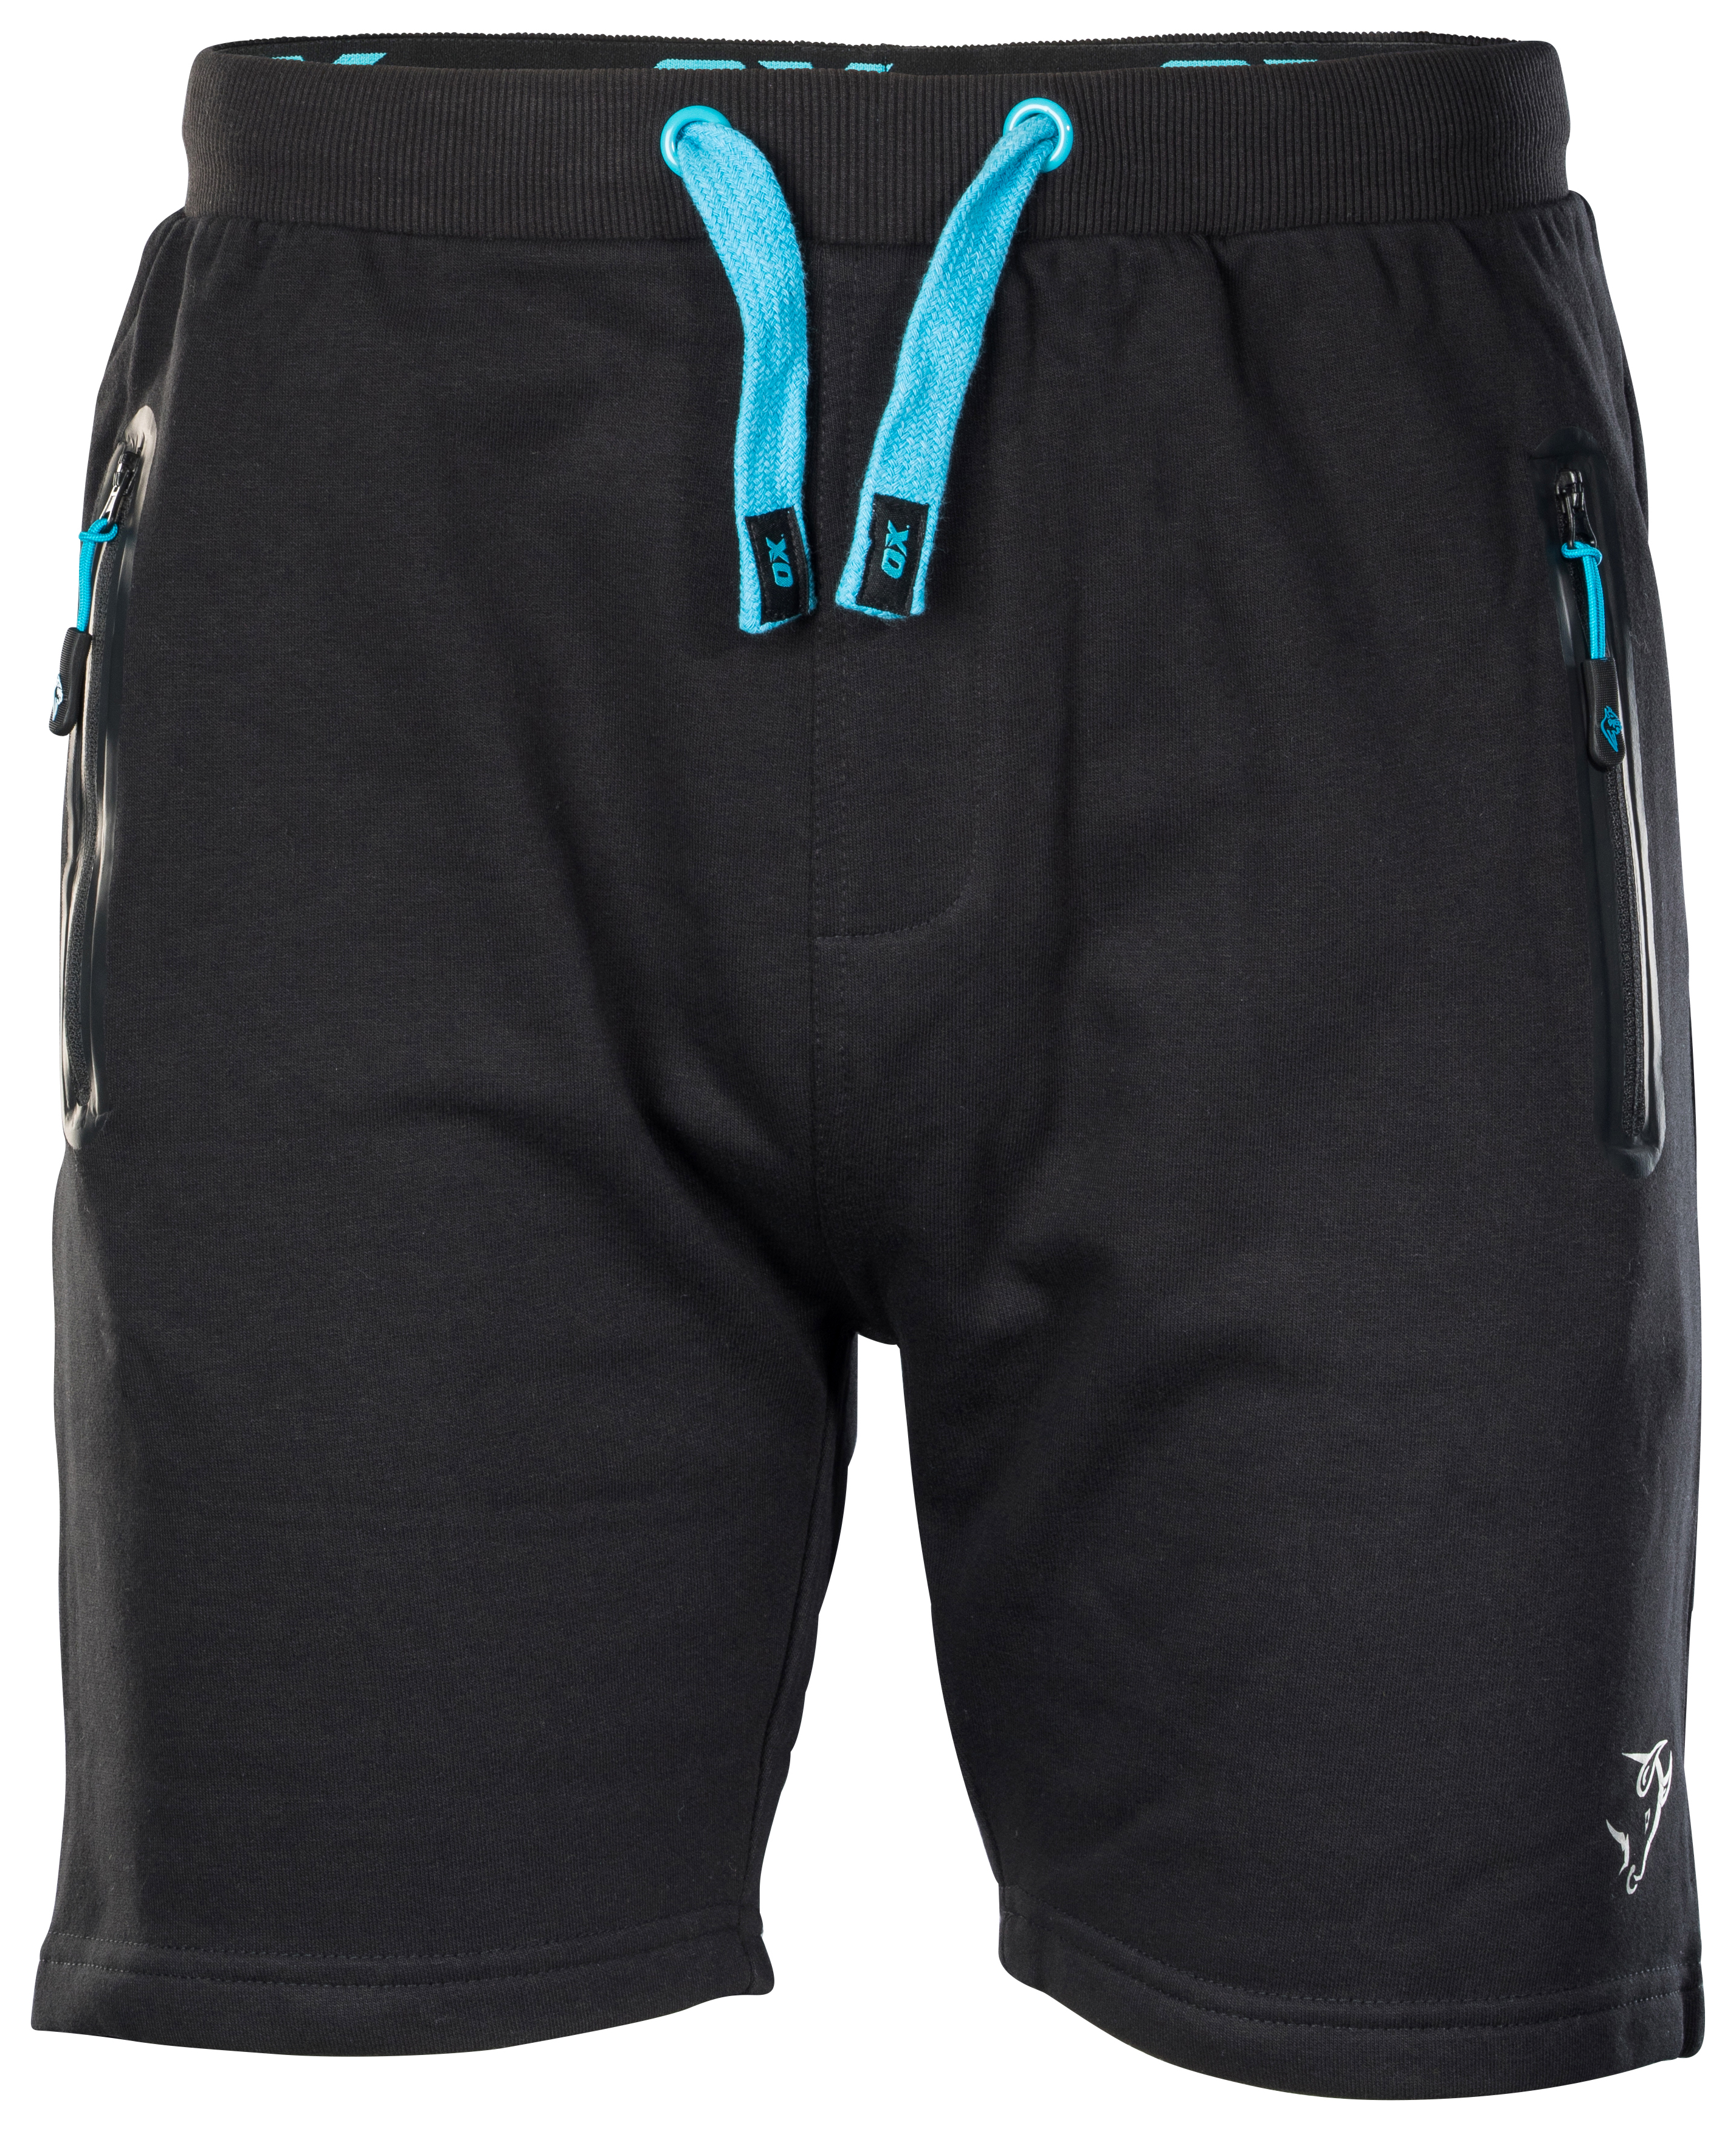 Image of OX OX-W553238 Black Jogger Shorts - 38W